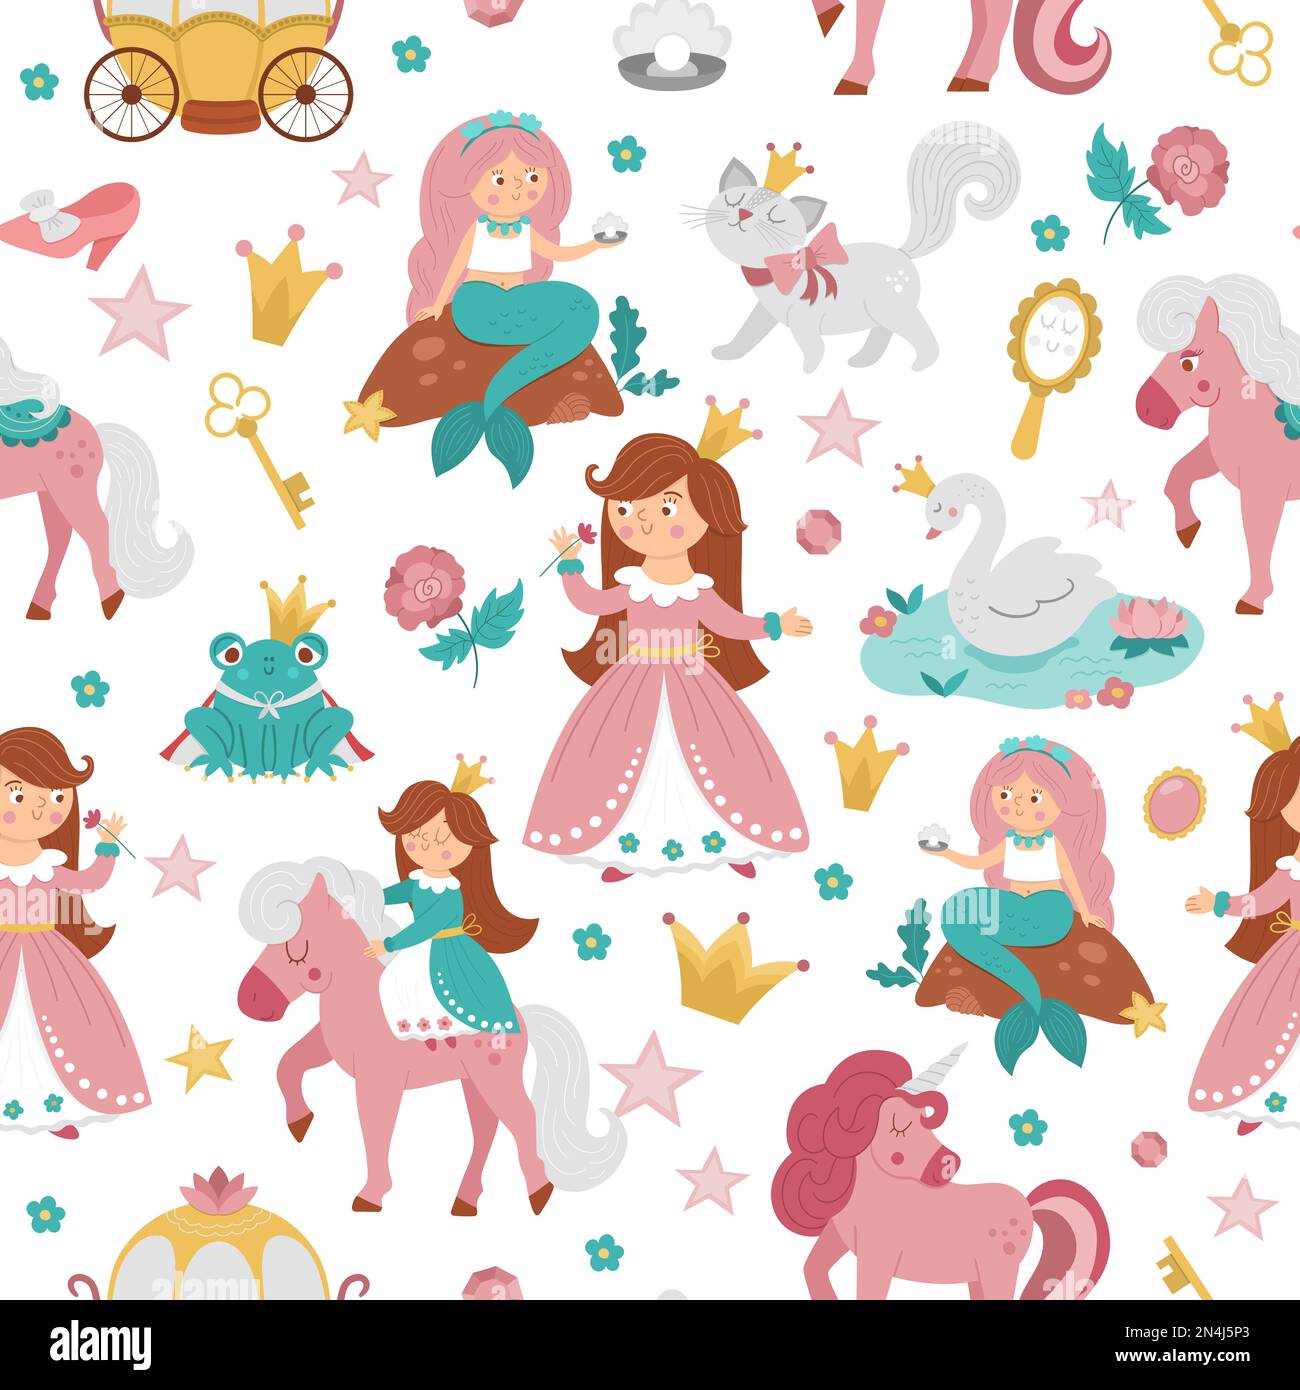 Fairy tale princess seamless pattern. Repeat background with fantasy girl, carriage, mermaid, unicorn frog prince, swan. Medieval fairytale maid digit Stock Vector